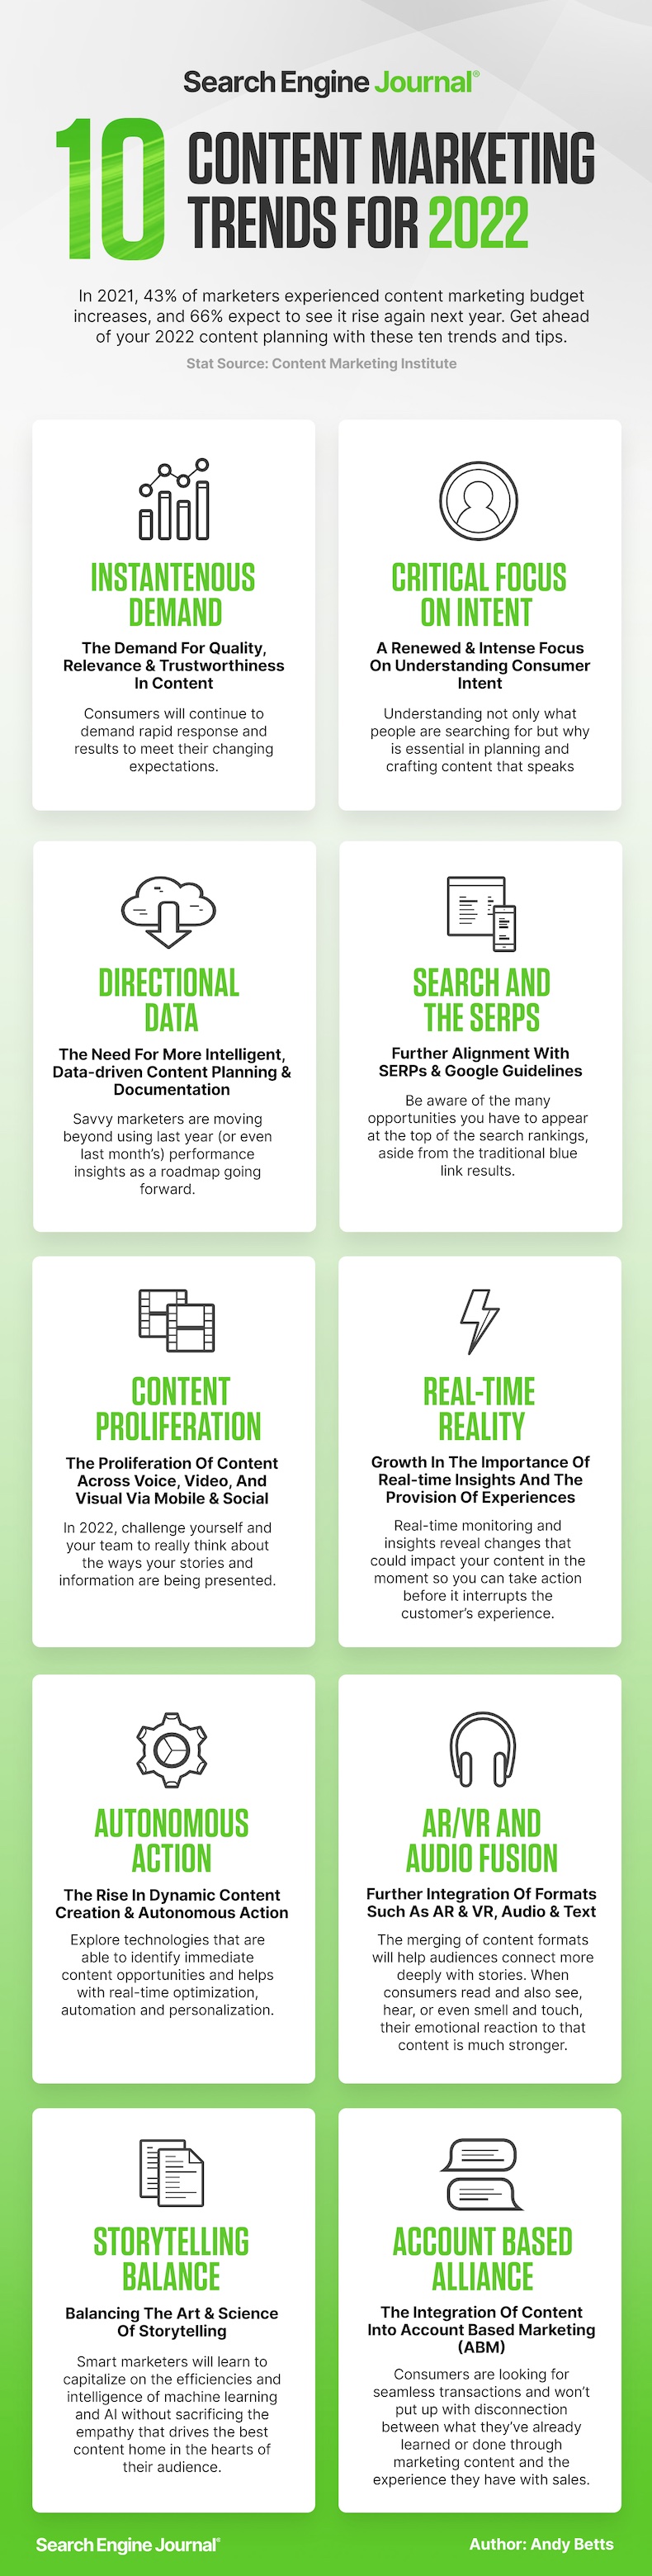 10 content marketing trends for 2022